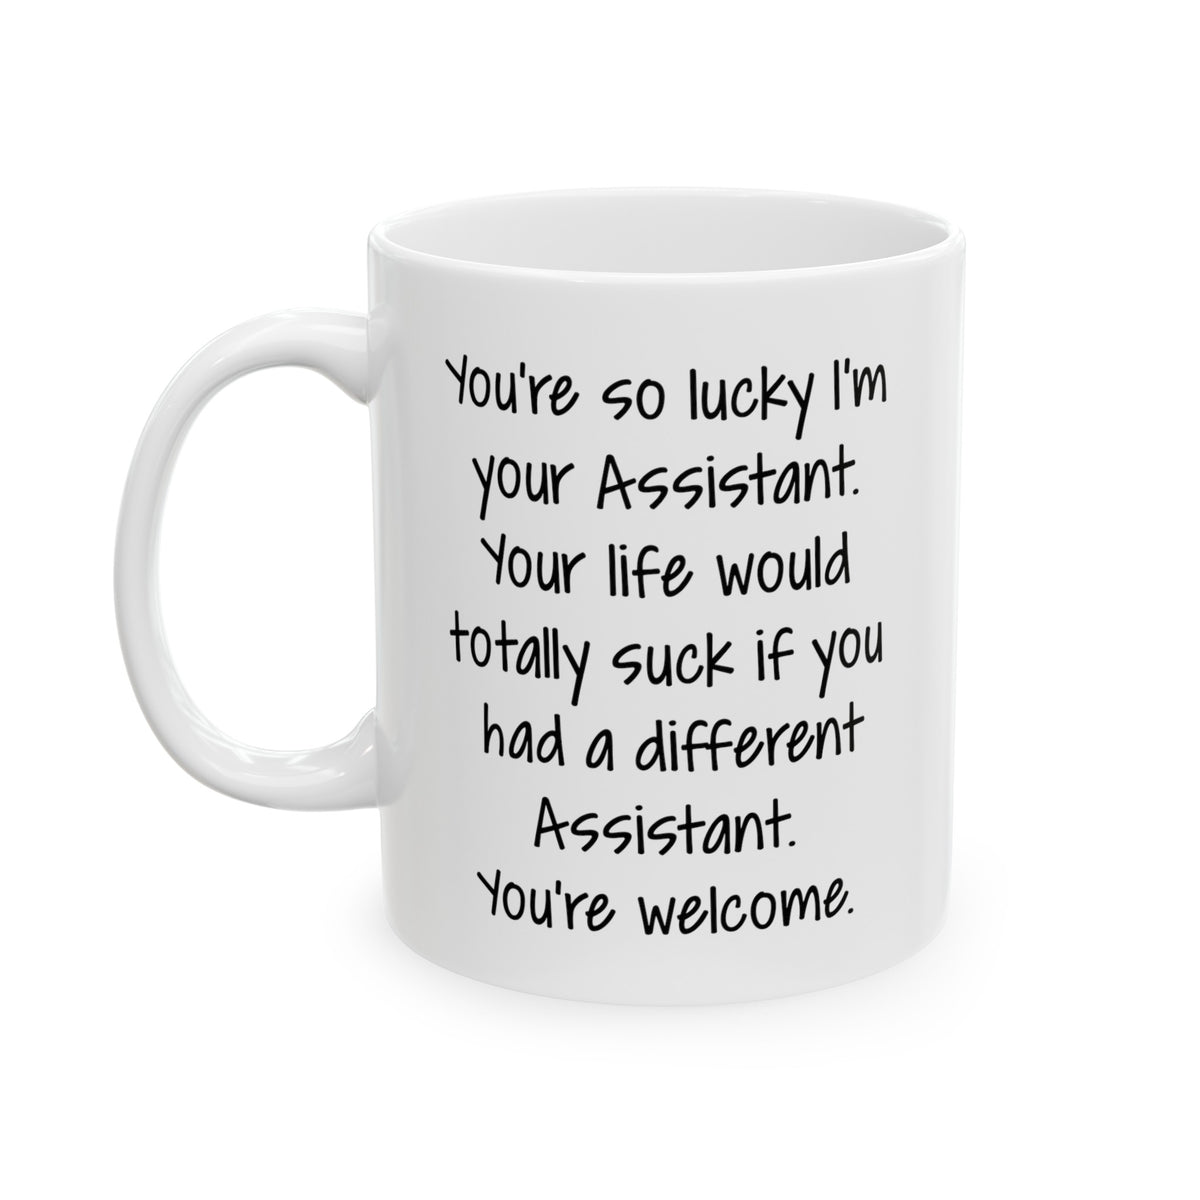 Administrative Assistant Coffee Mug - You're so lucky I'm your Assistant - Funny Gifts For Admin